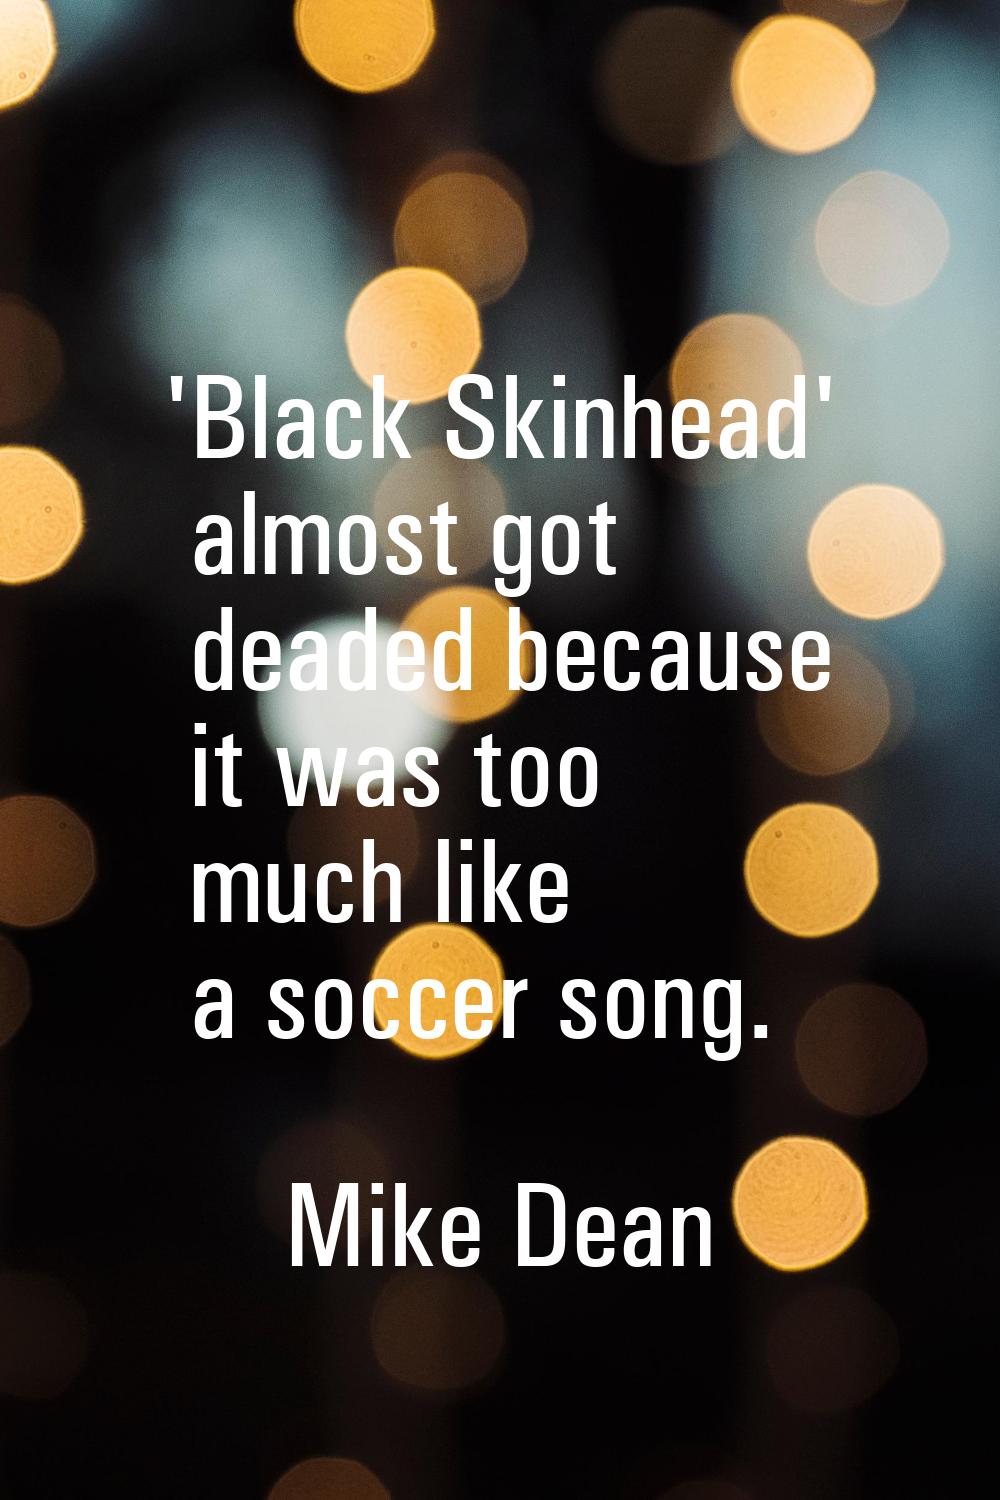 'Black Skinhead' almost got deaded because it was too much like a soccer song.